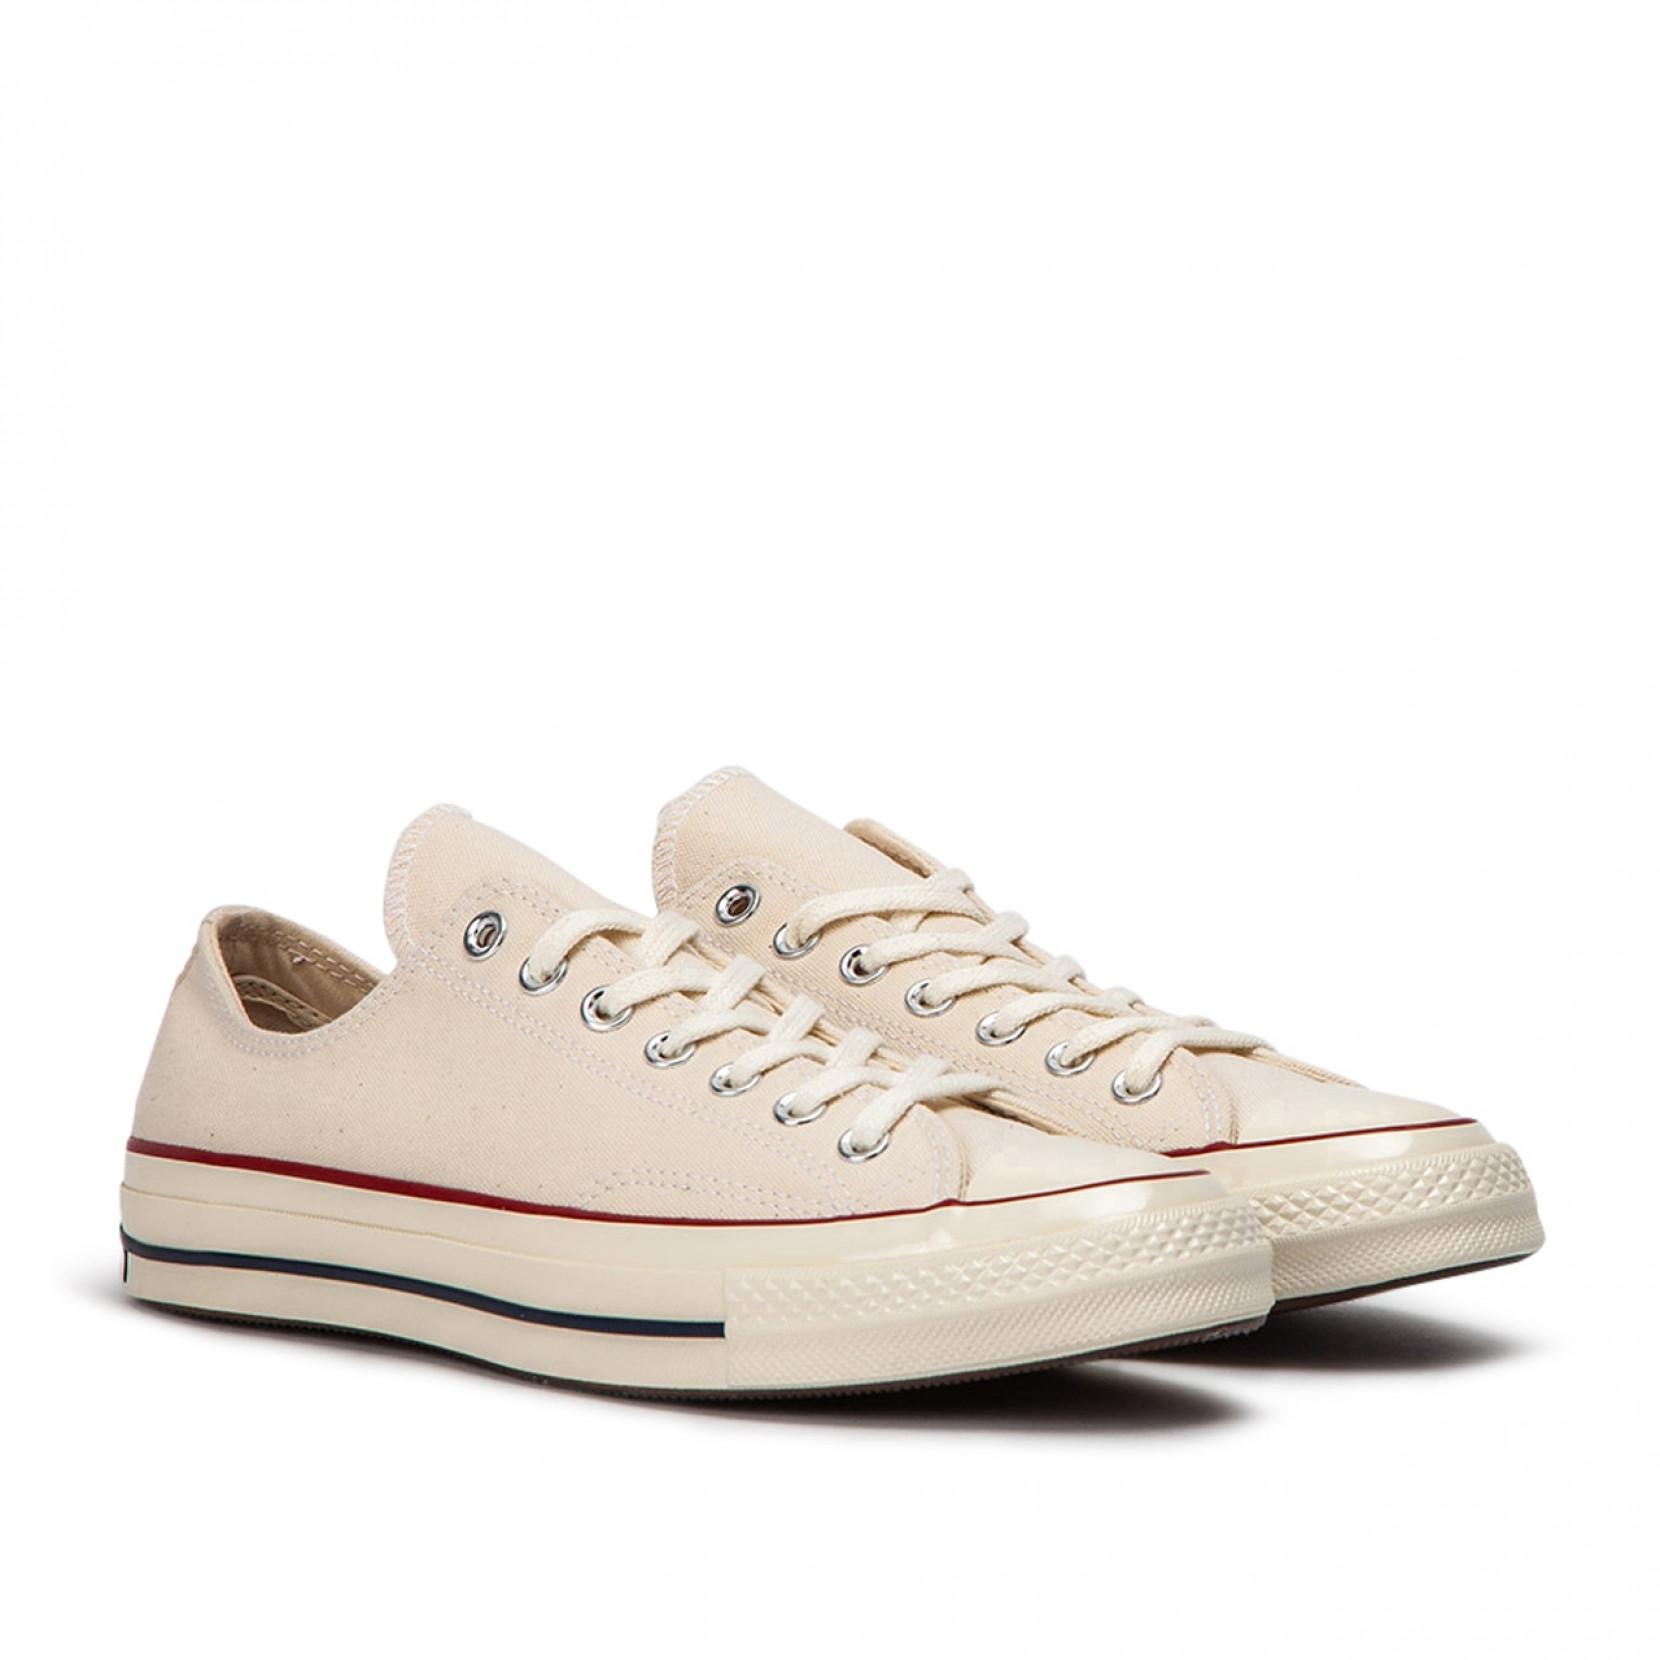 Converse Canvas White Chuck 70 Low Shoes for Men - Save 78% - Lyst